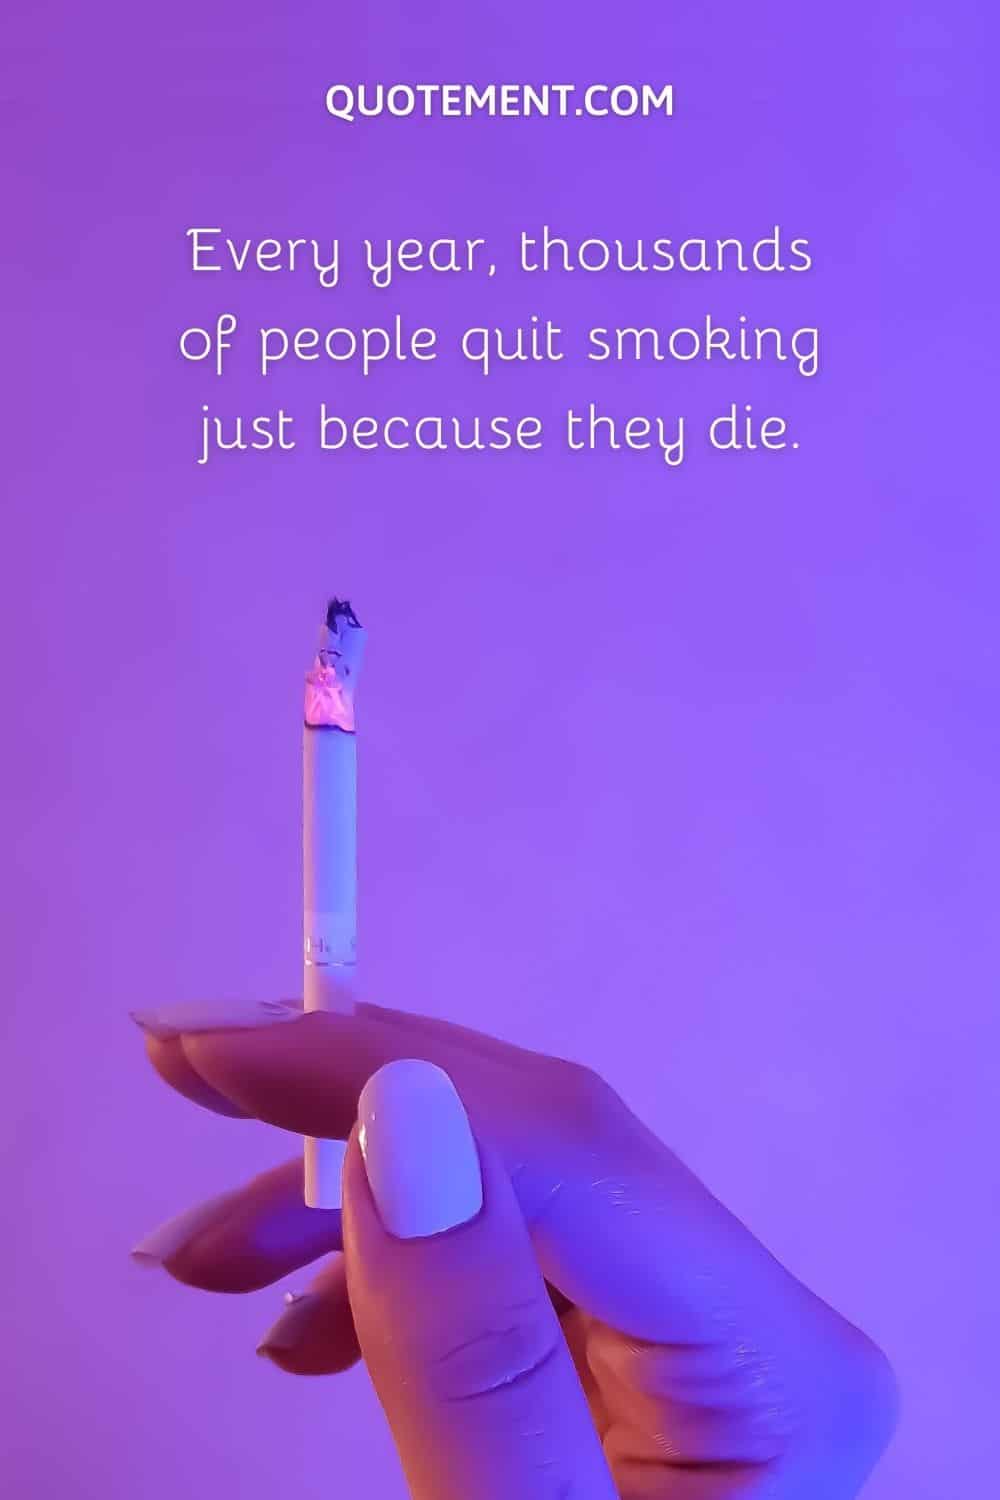 thousands of people quit smoking just because they die